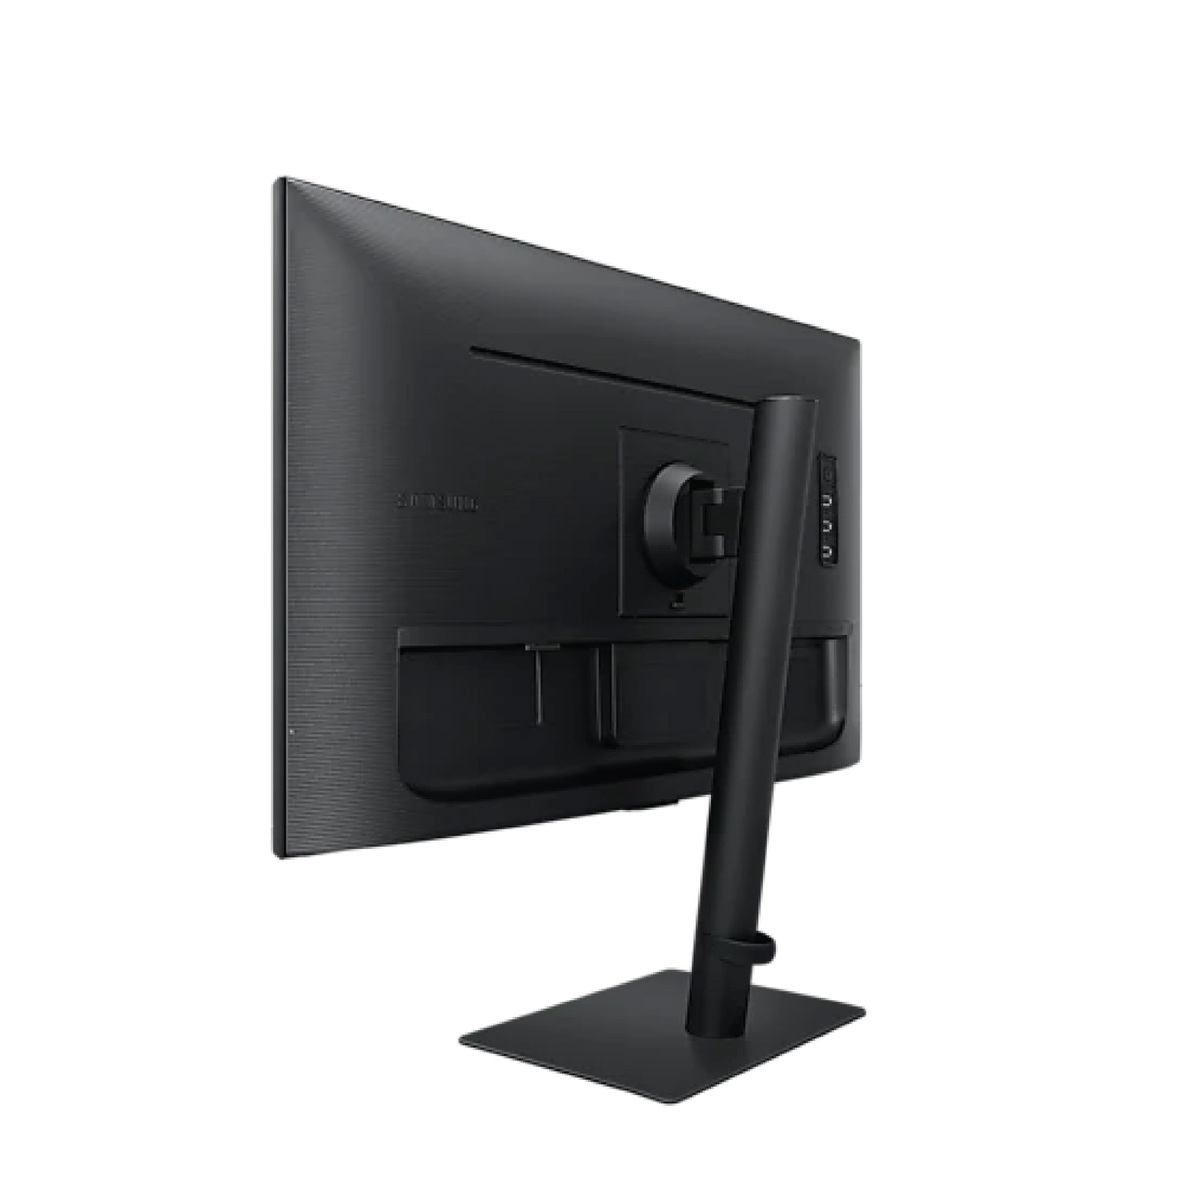 Samsung 27" QHD Monitor with IPS panel and USB type-C LS27A600